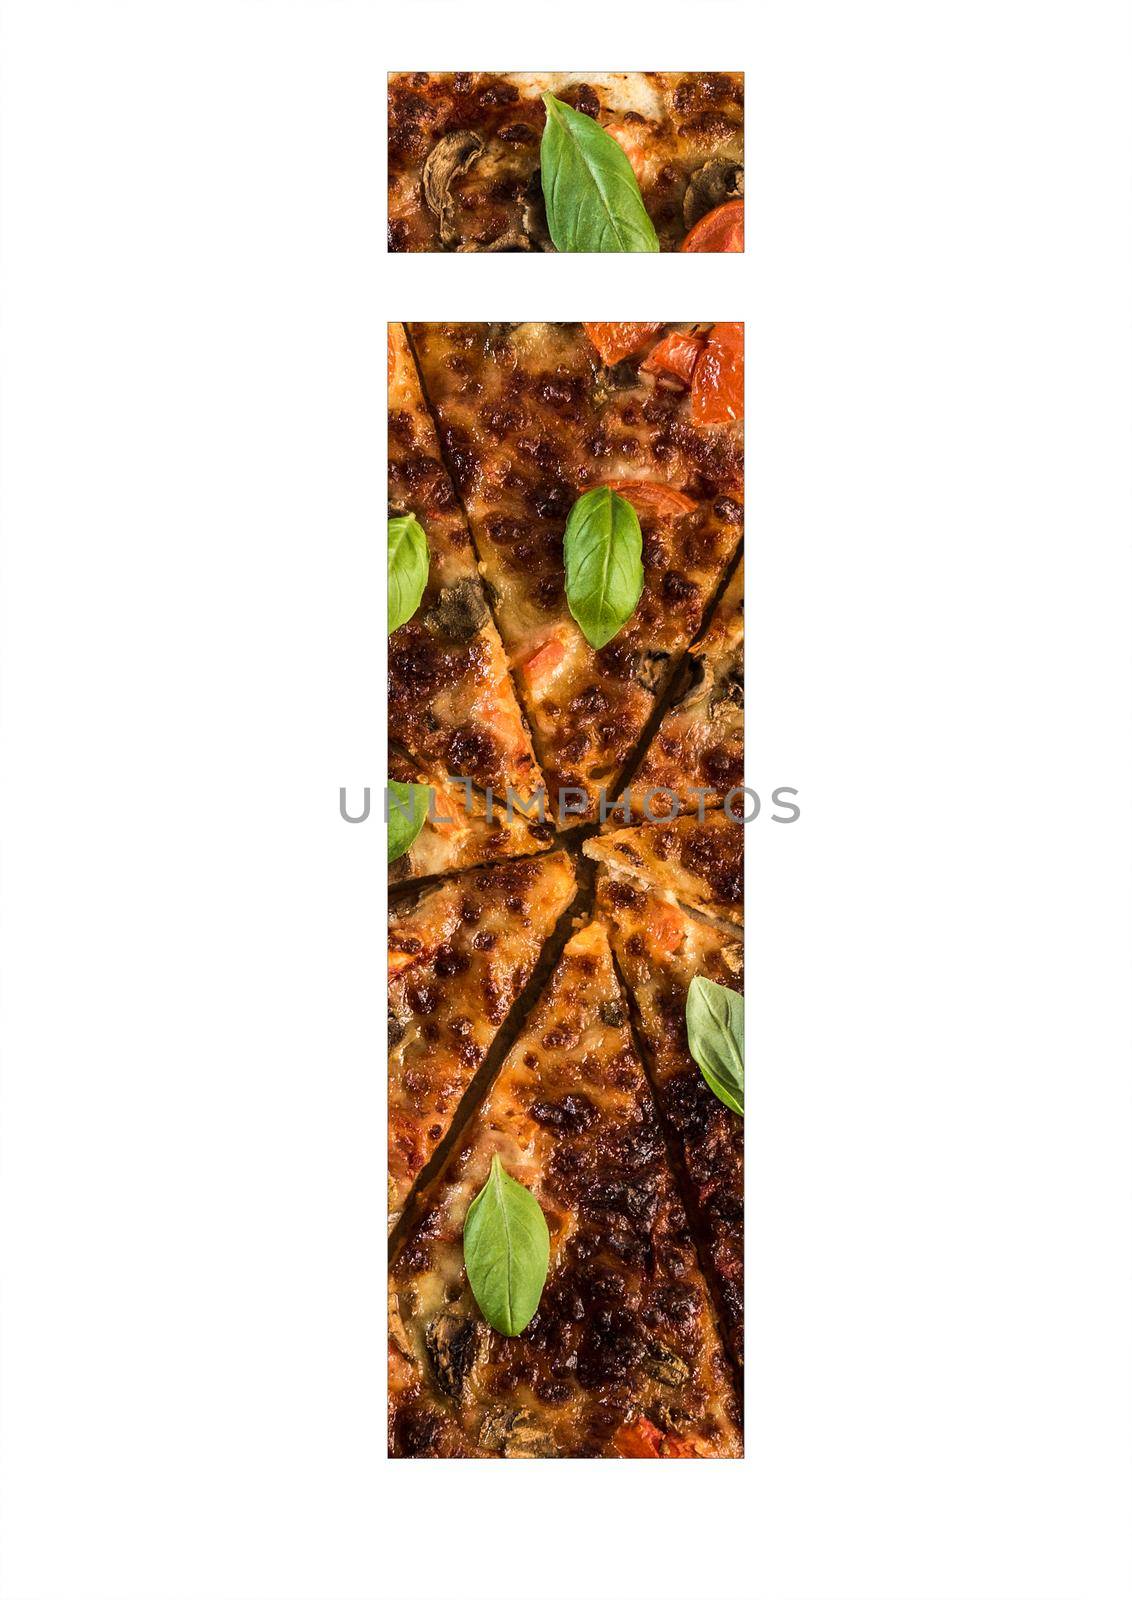 Vegetarian pizza with mushrooms on a wooden background